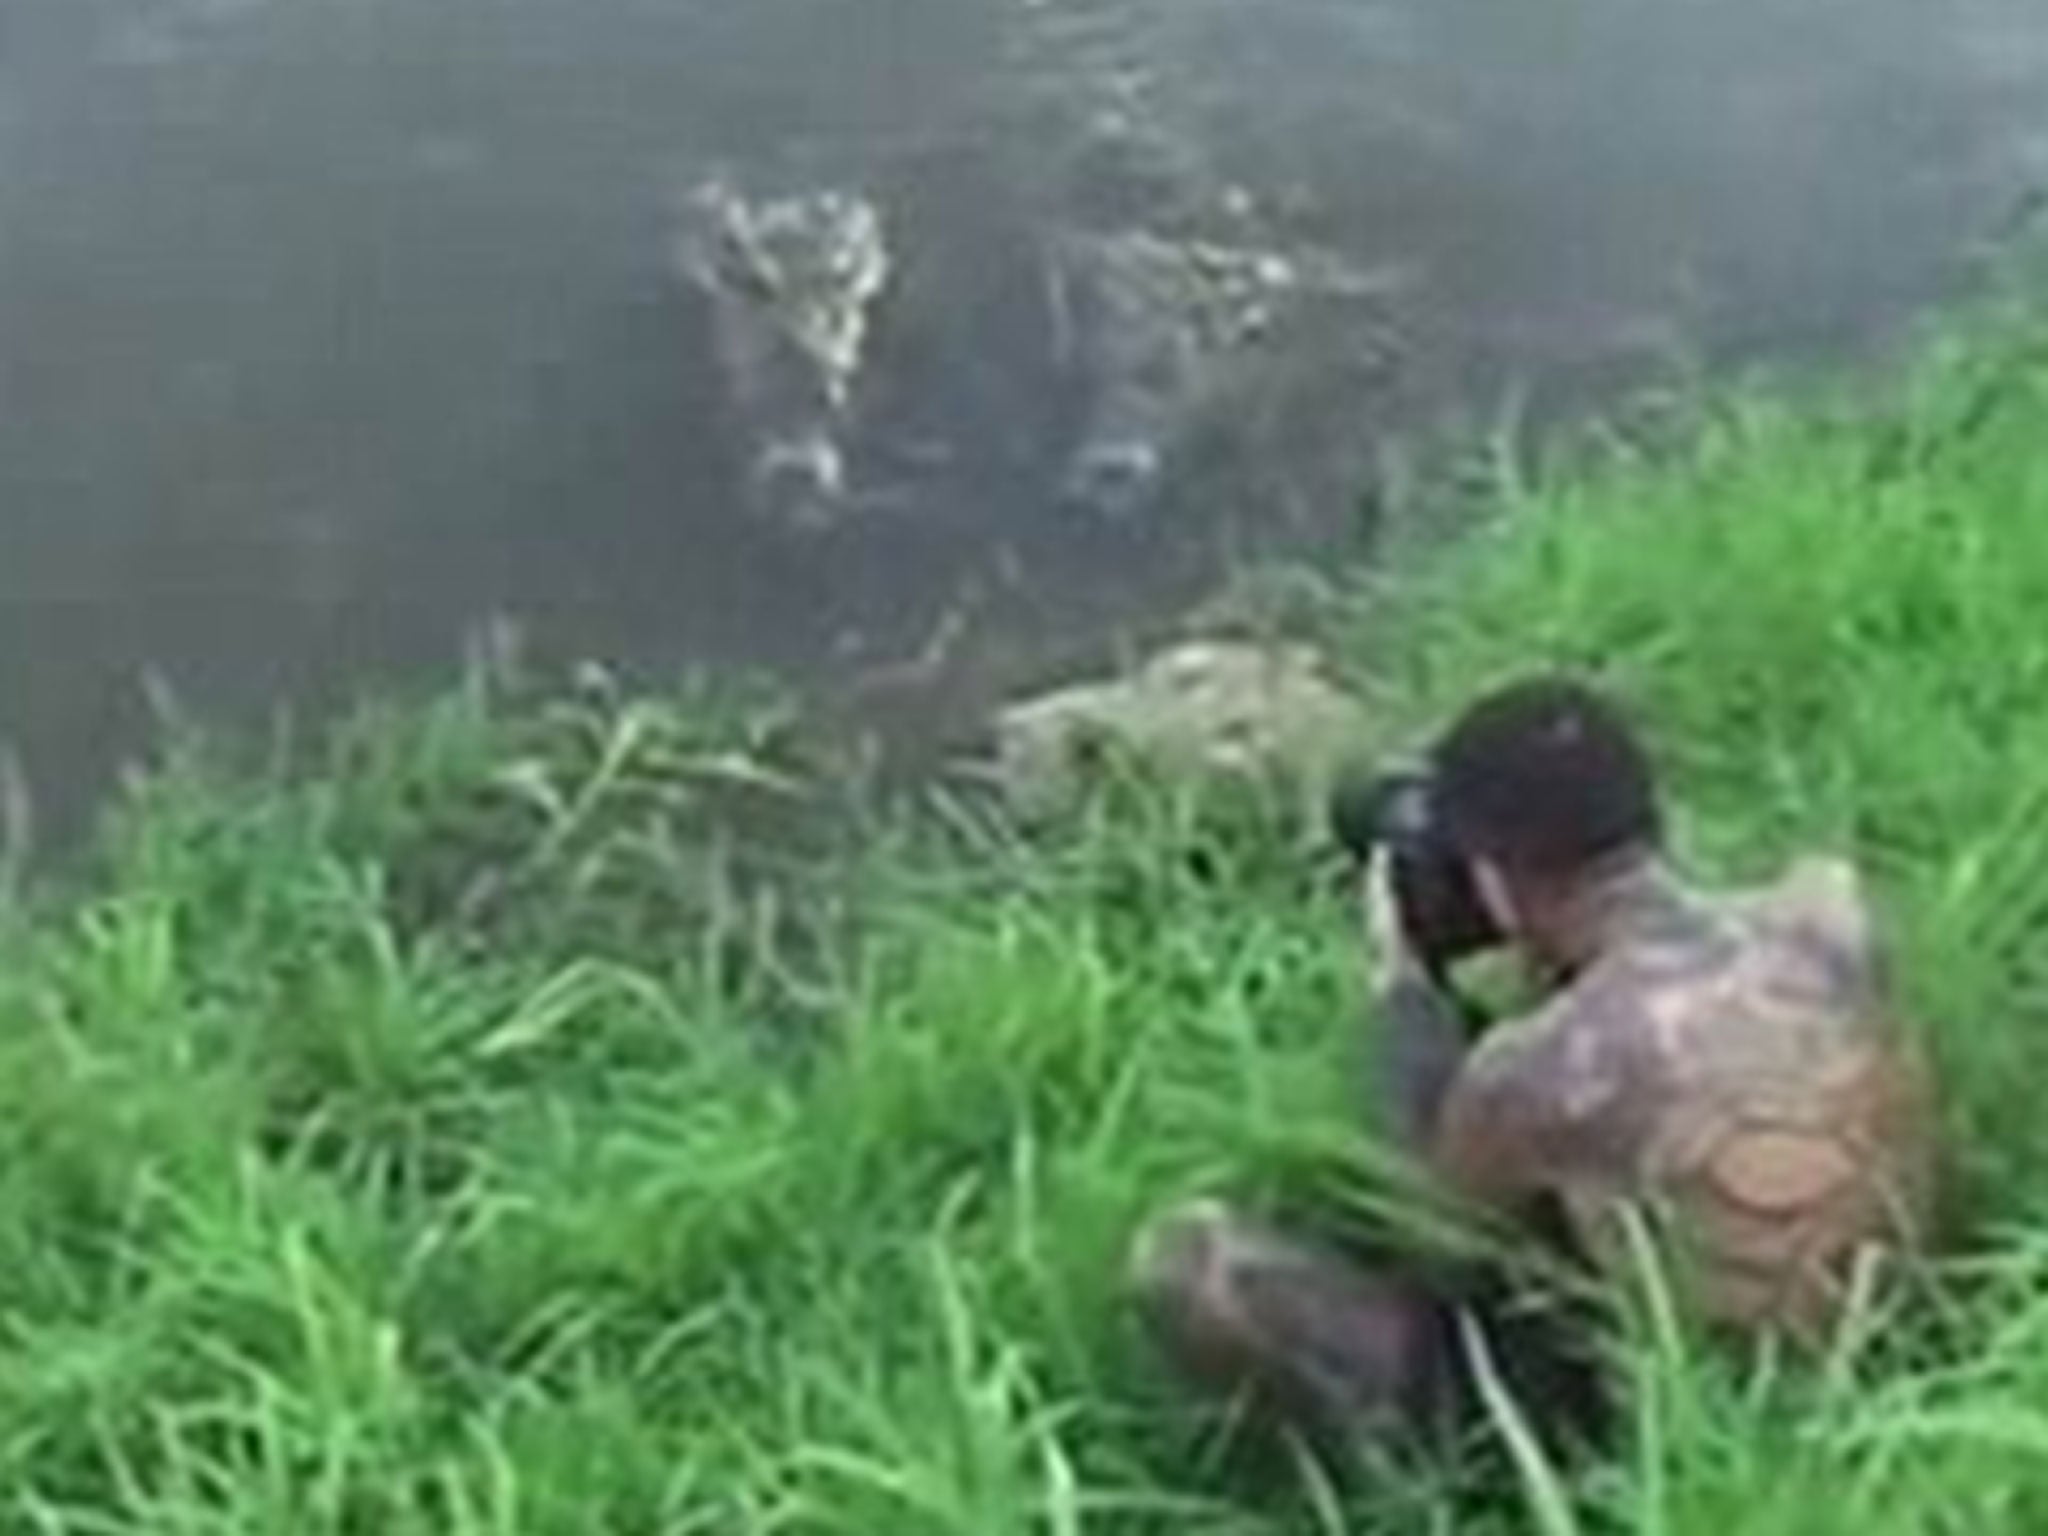 Antonio Ruiz and some friends were baiting the crocs on the banks of the Tarcoles River in Costa Rica, luring them over by throwing pieces of meat into the water